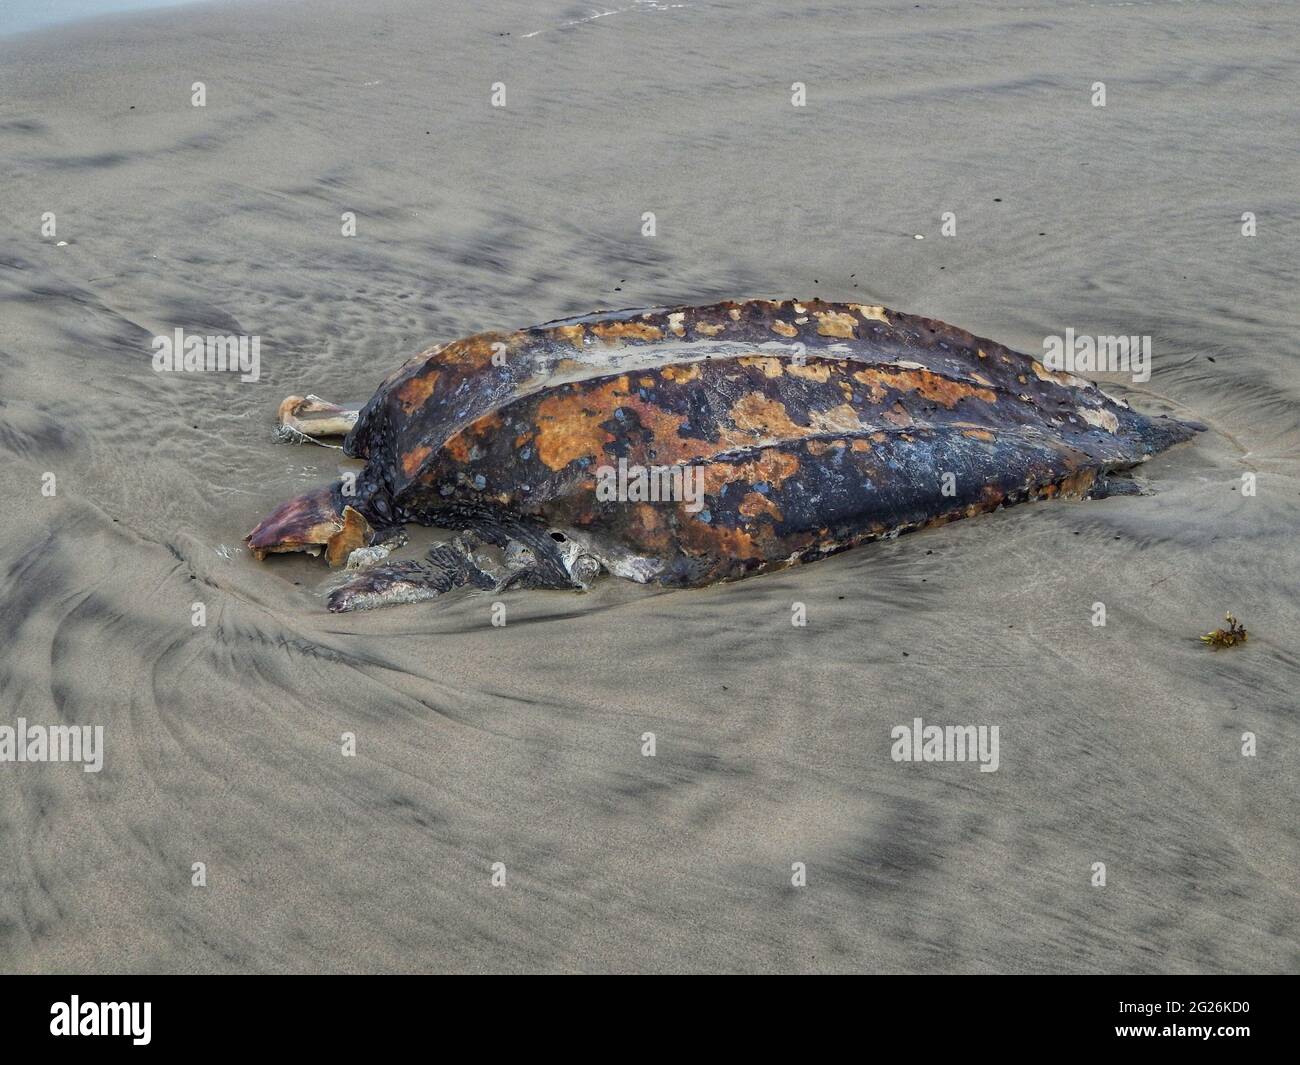 Manzanilla, Trinidad- May 19, 2016: The carcass of a dead leatherback turtle on the Manzanilla Beach in Trinidad. The cause of death is unknown. Stock Photo